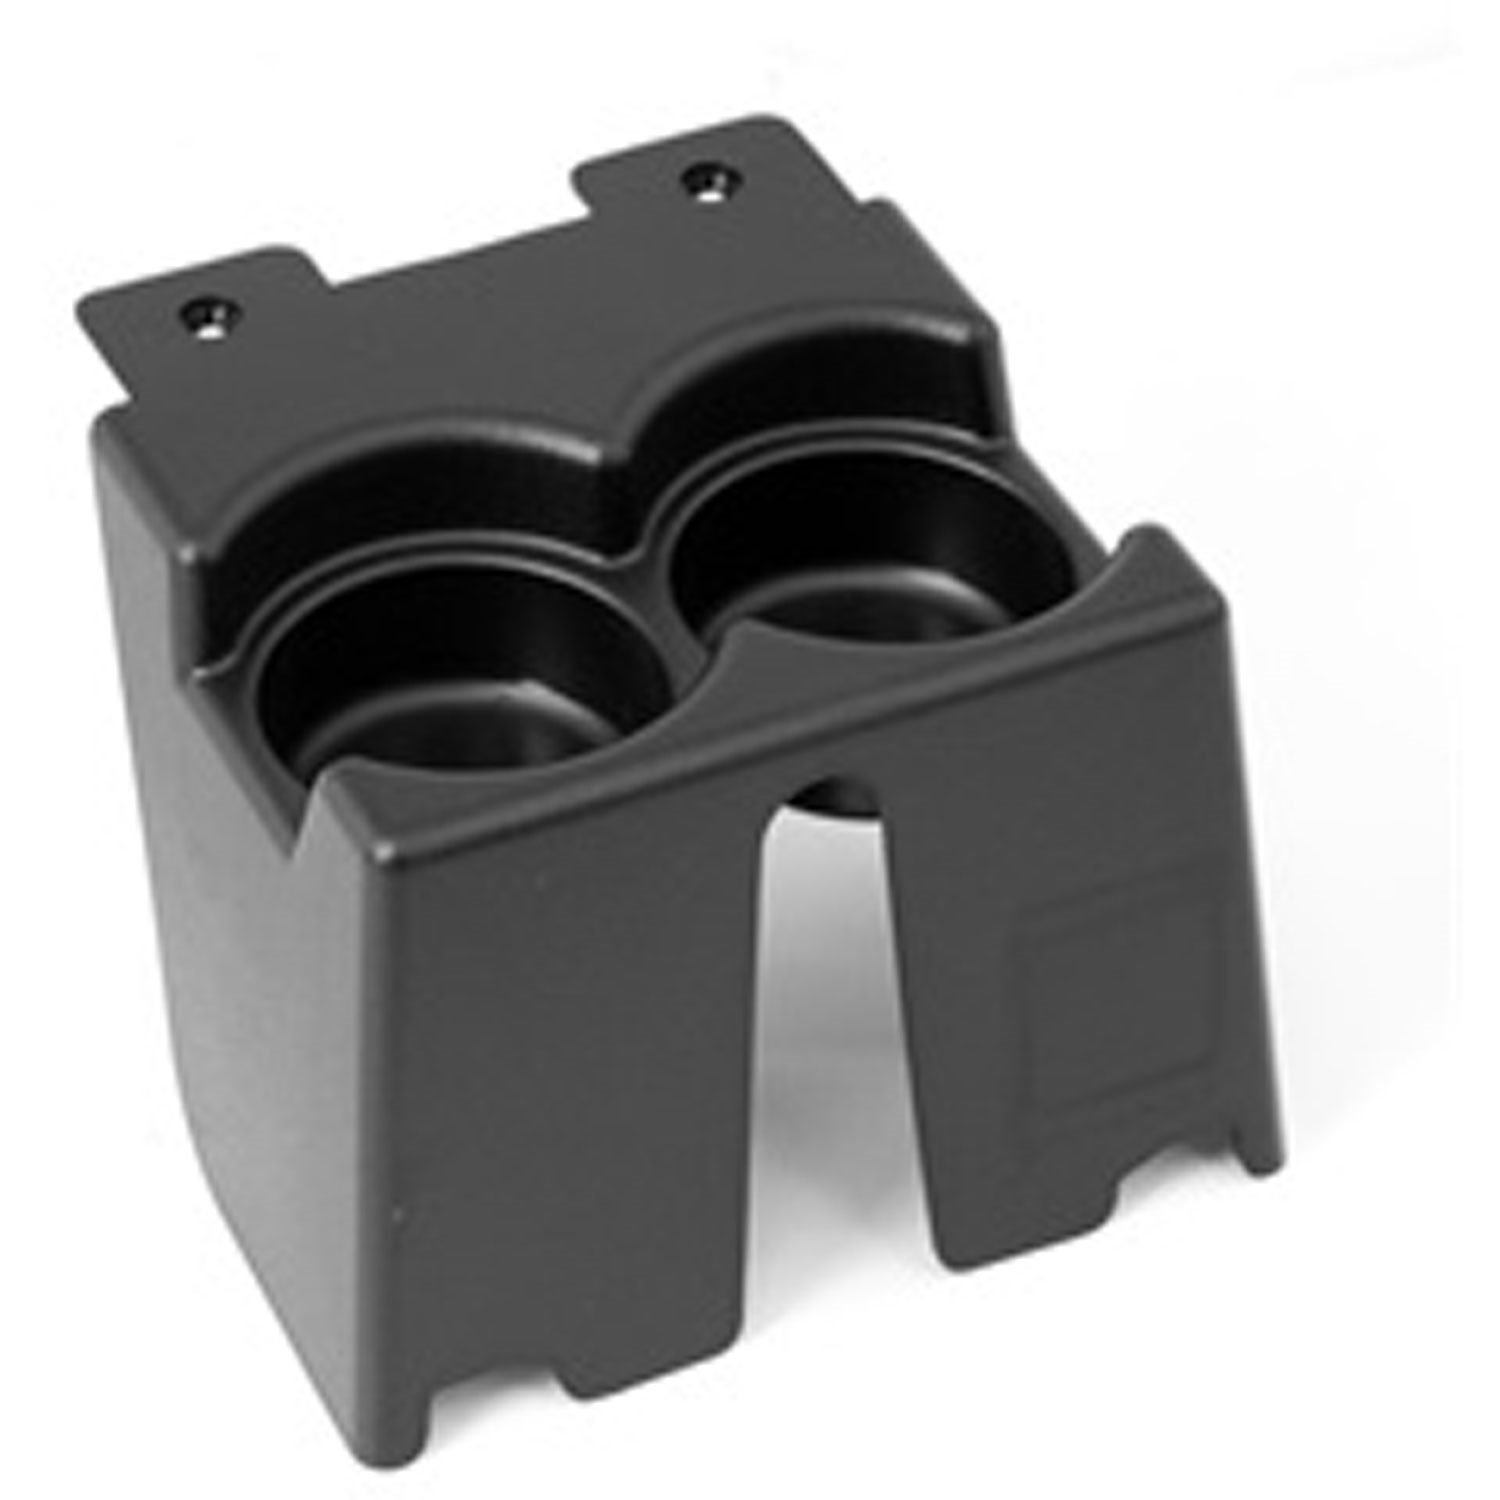 This black plastic dual cup holder from Omix-ADA attaches to the factory console in 84-96 Jeep Cherokee XJ.